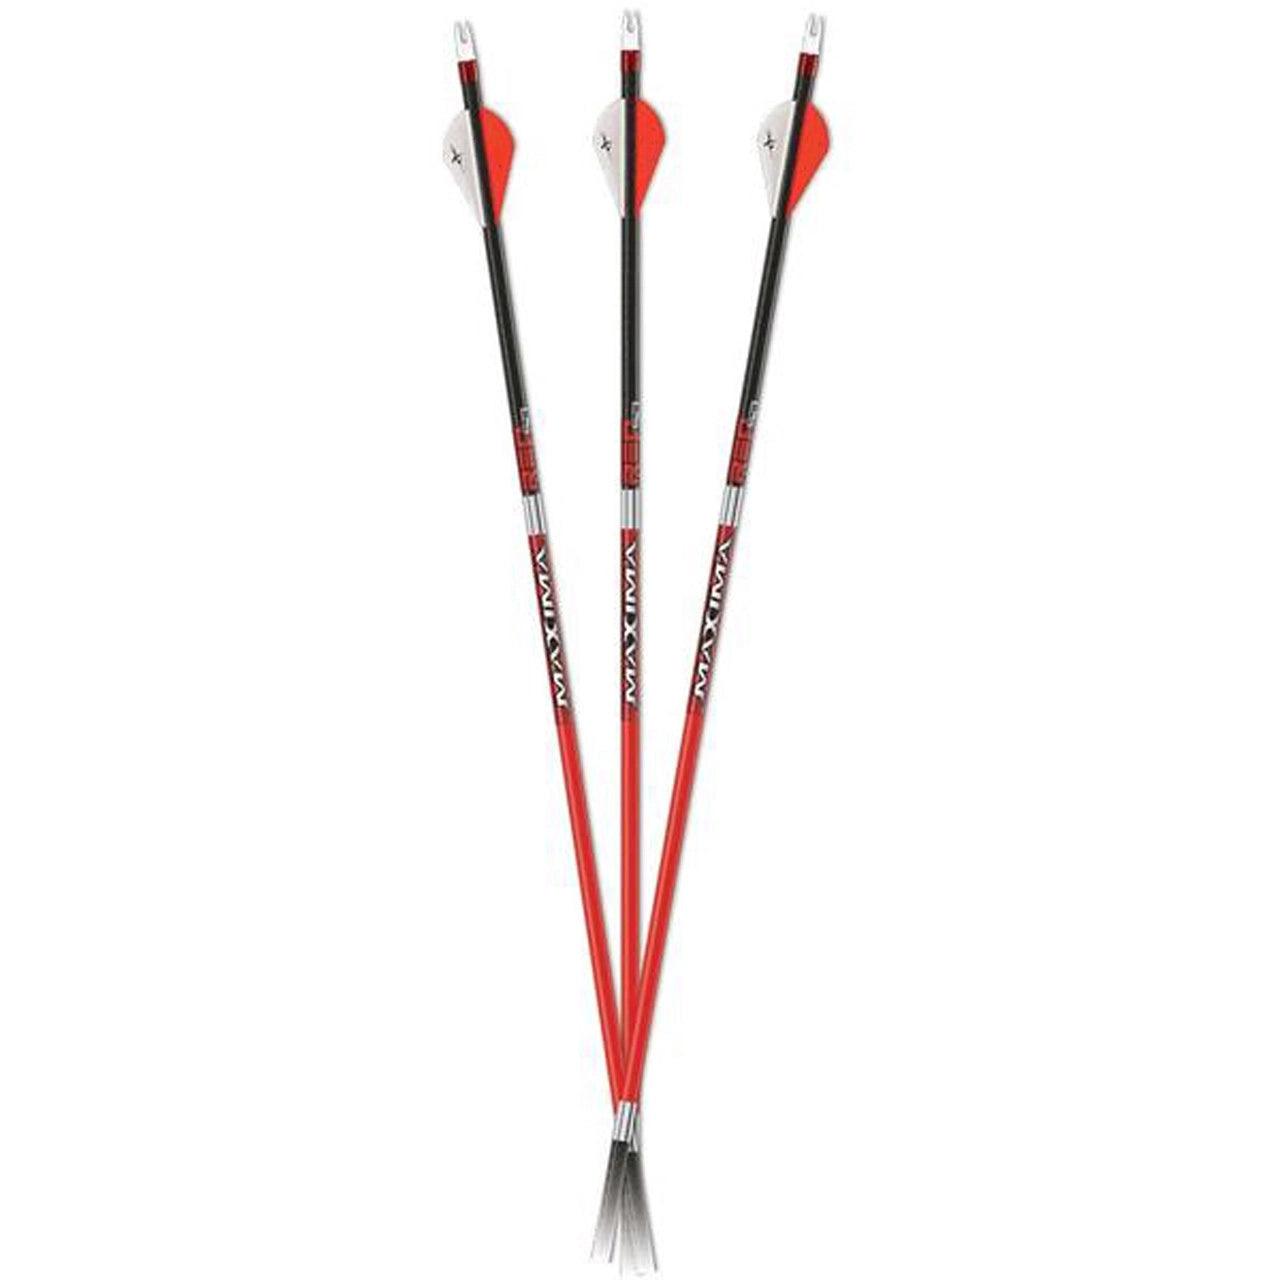 Carbon Express Archery Maxima Red SD .203